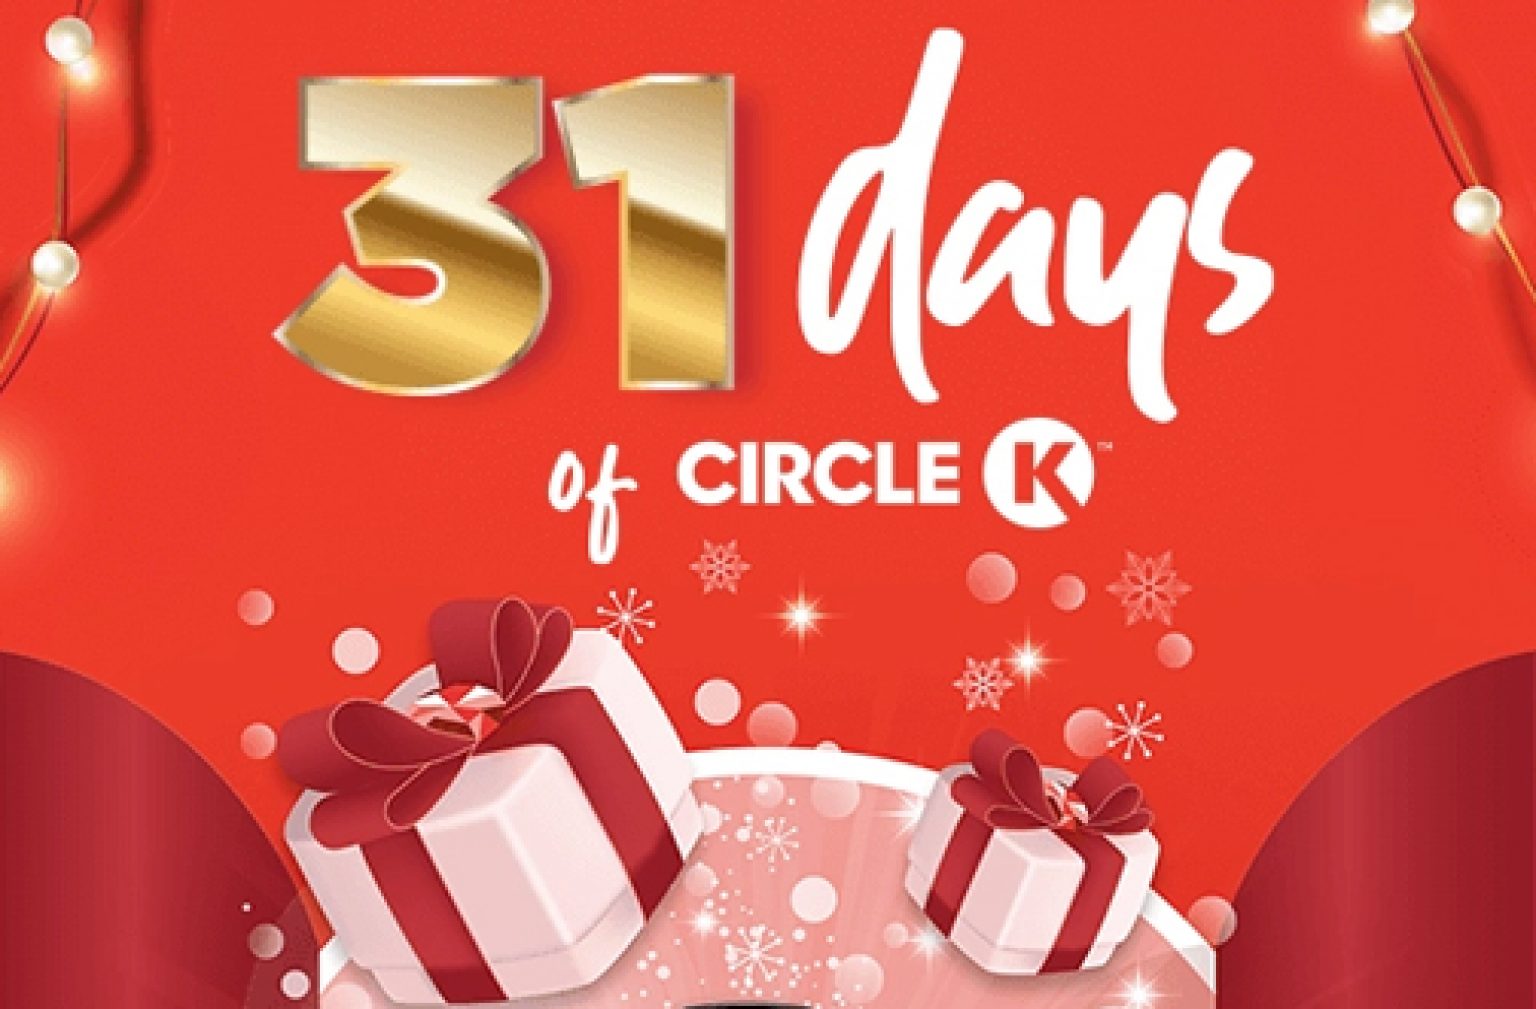 Circle K Contests 31 Days of Circle K Contest — Deals from SaveaLoonie!